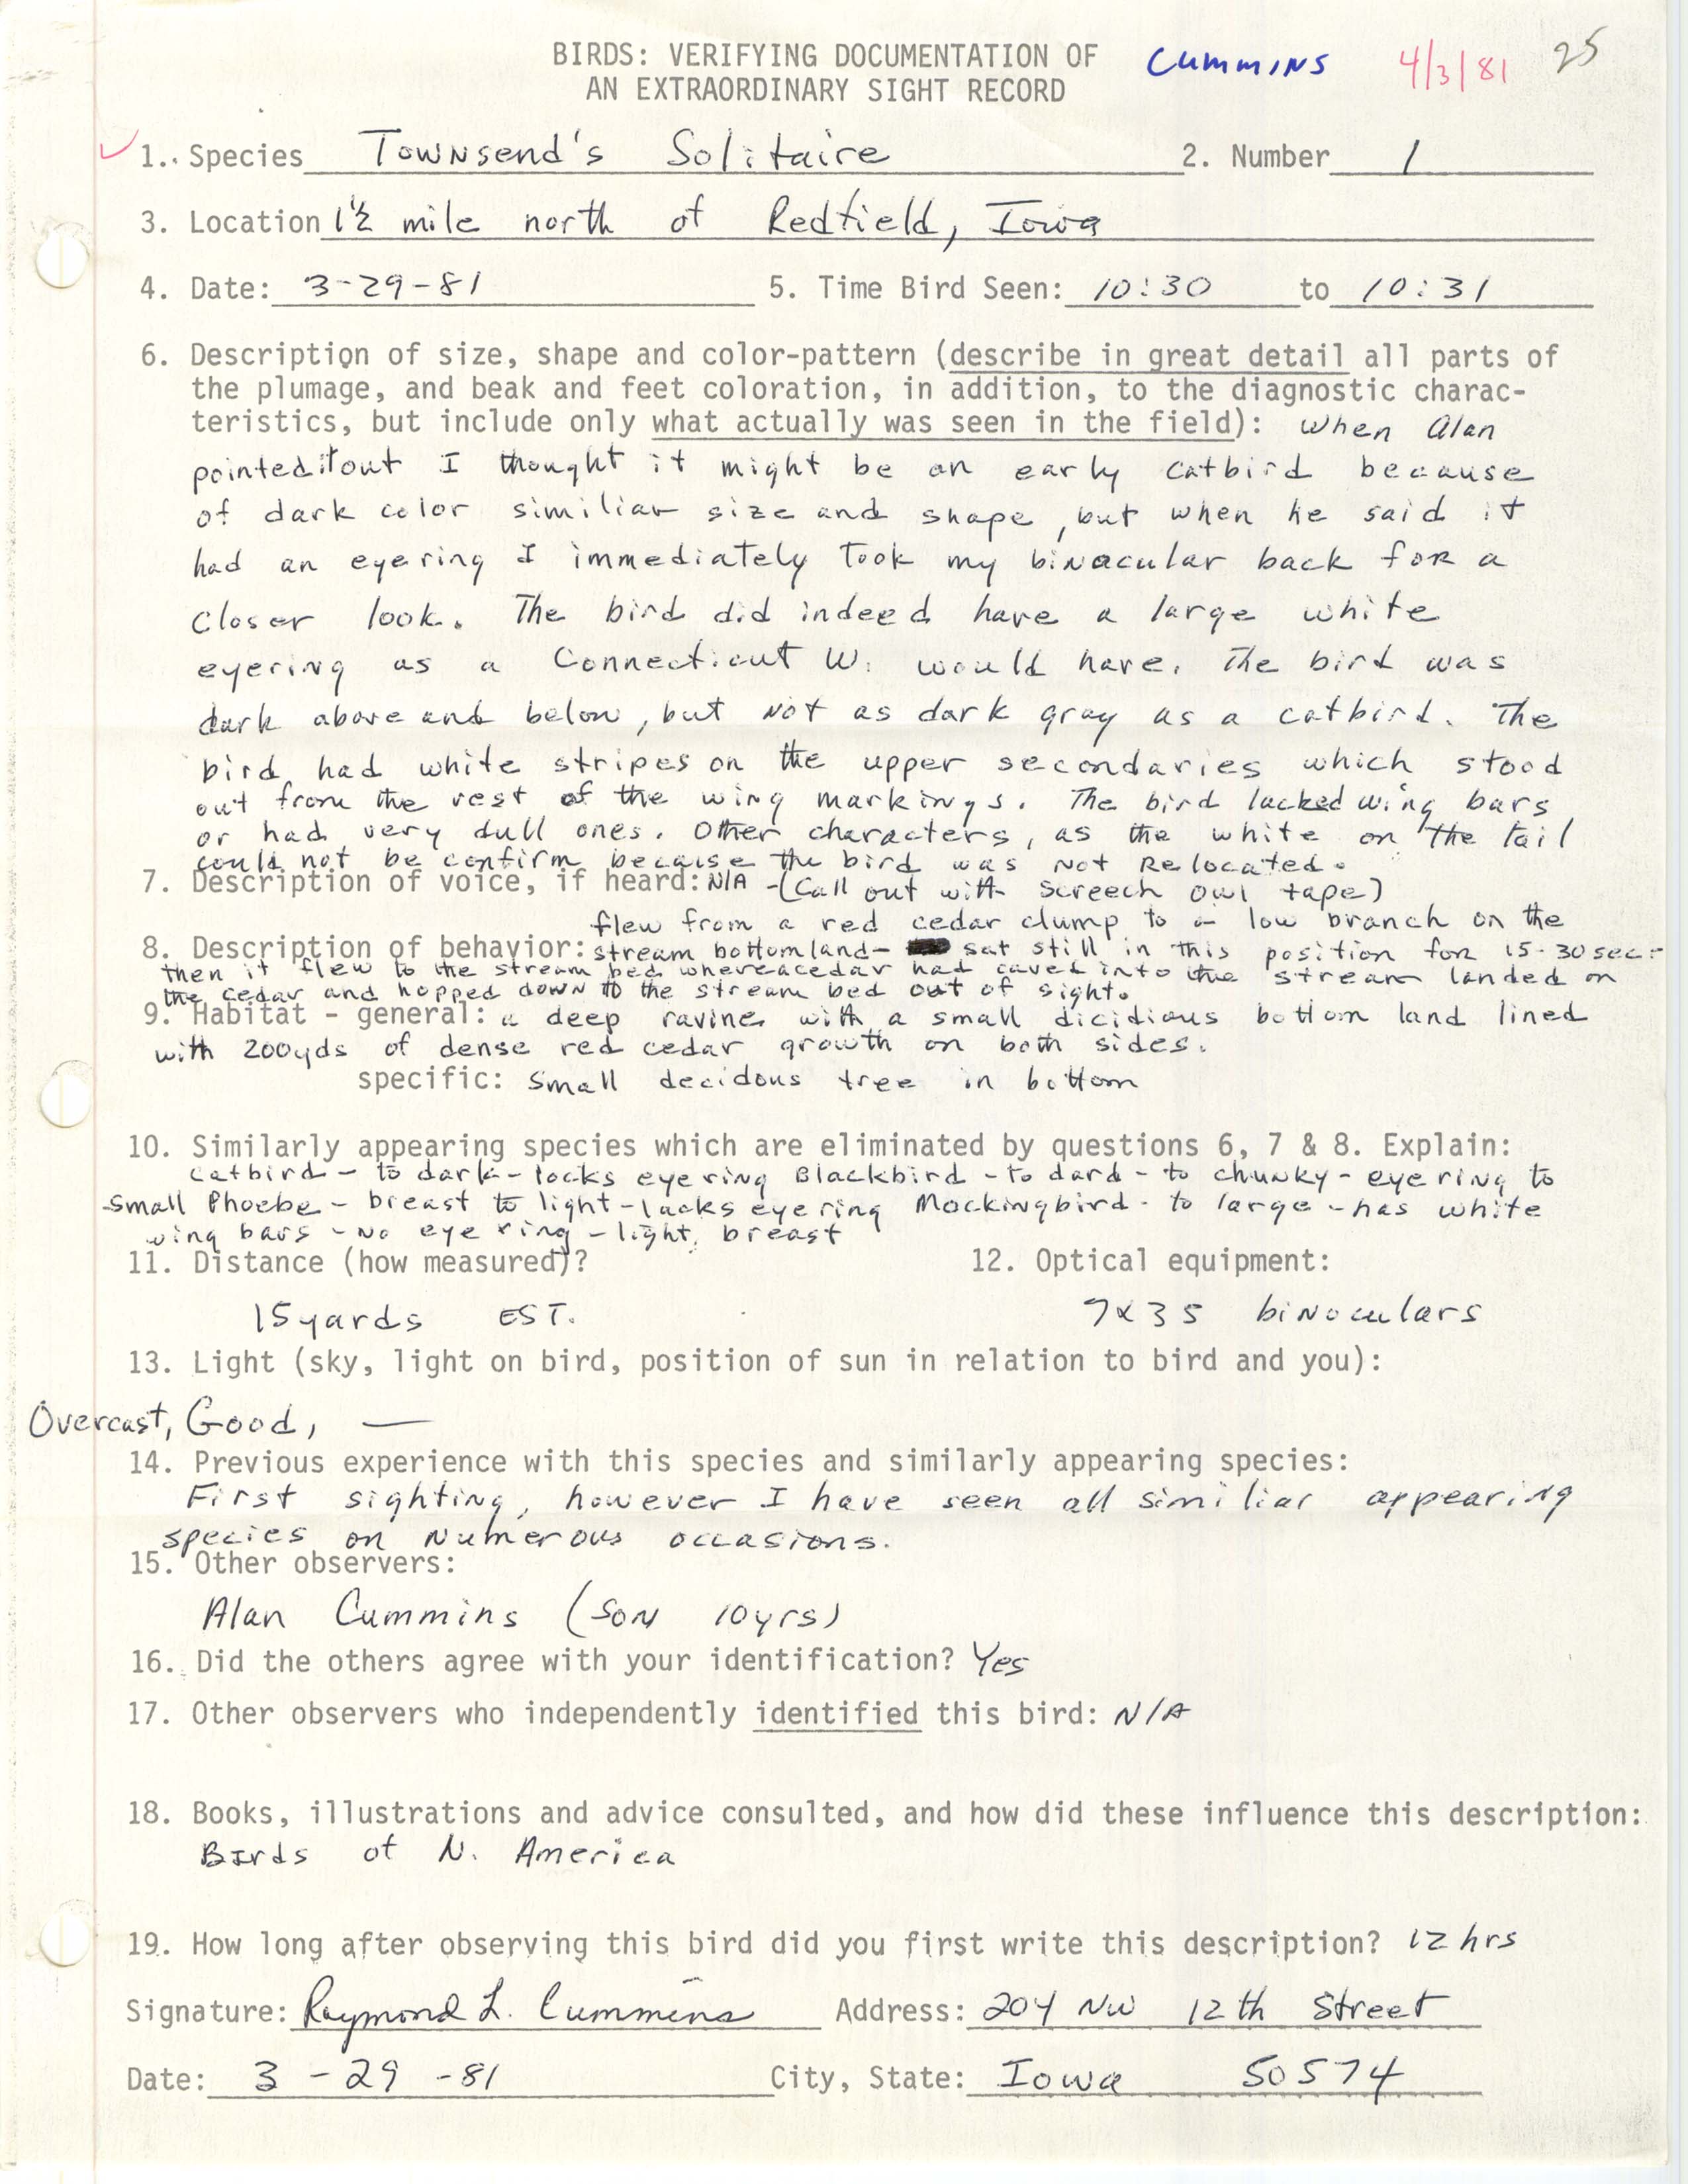 Rare bird documentation form for Townsend's Solitaire north of Redfield, 1981